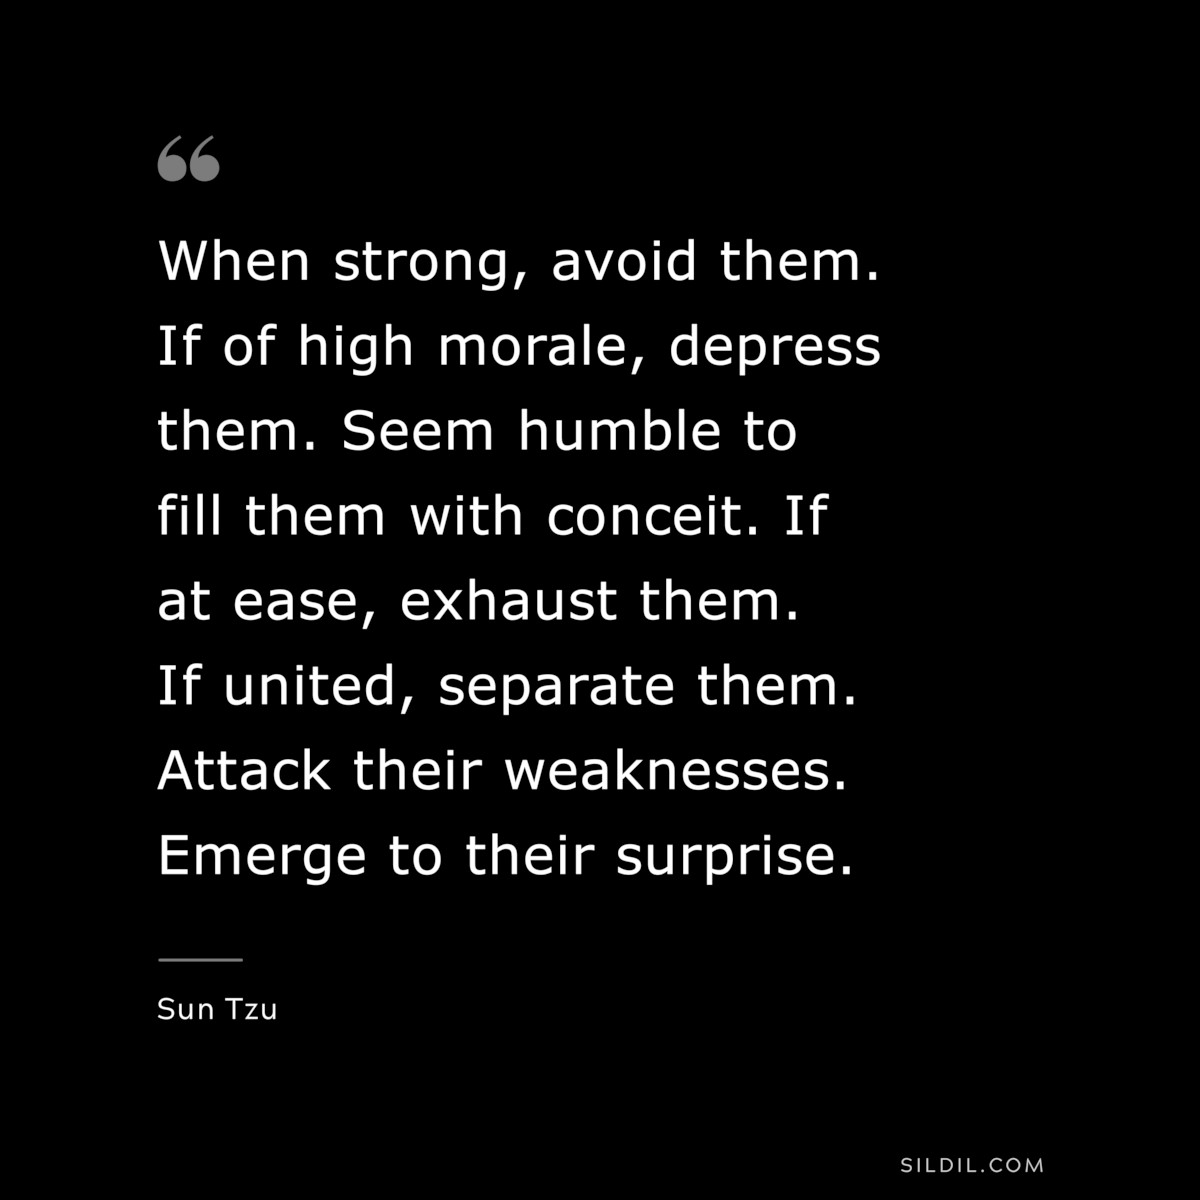 When strong, avoid them. If of high morale, depress them. Seem humble to fill them with conceit. If at ease, exhaust them. If united, separate them. Attack their weaknesses. Emerge to their surprise.― Sun Tzu